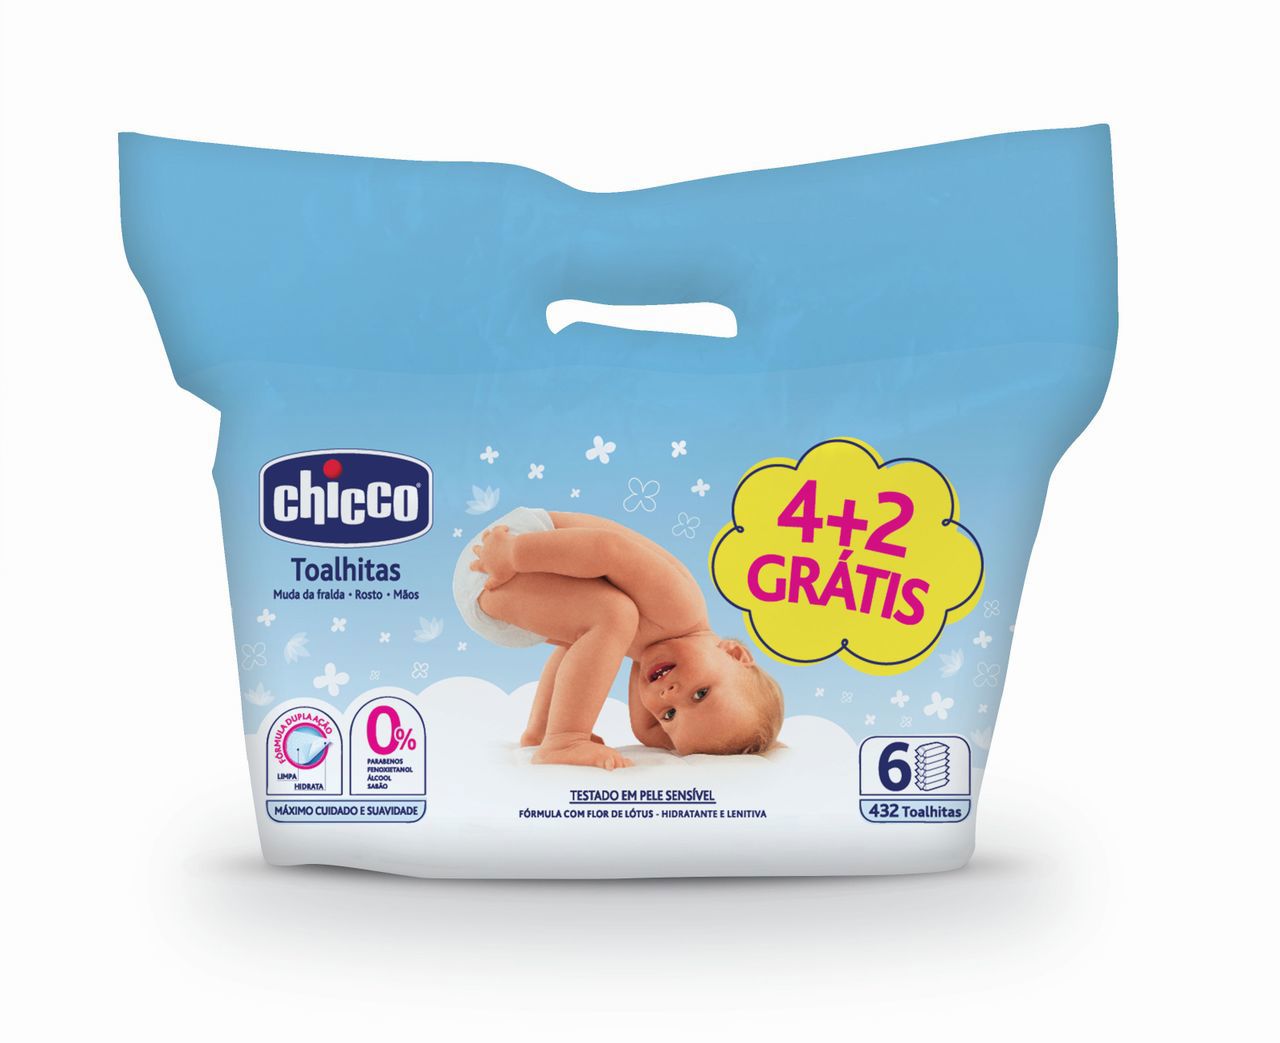 6-PACK TOALHITAS CHICCO image number 0